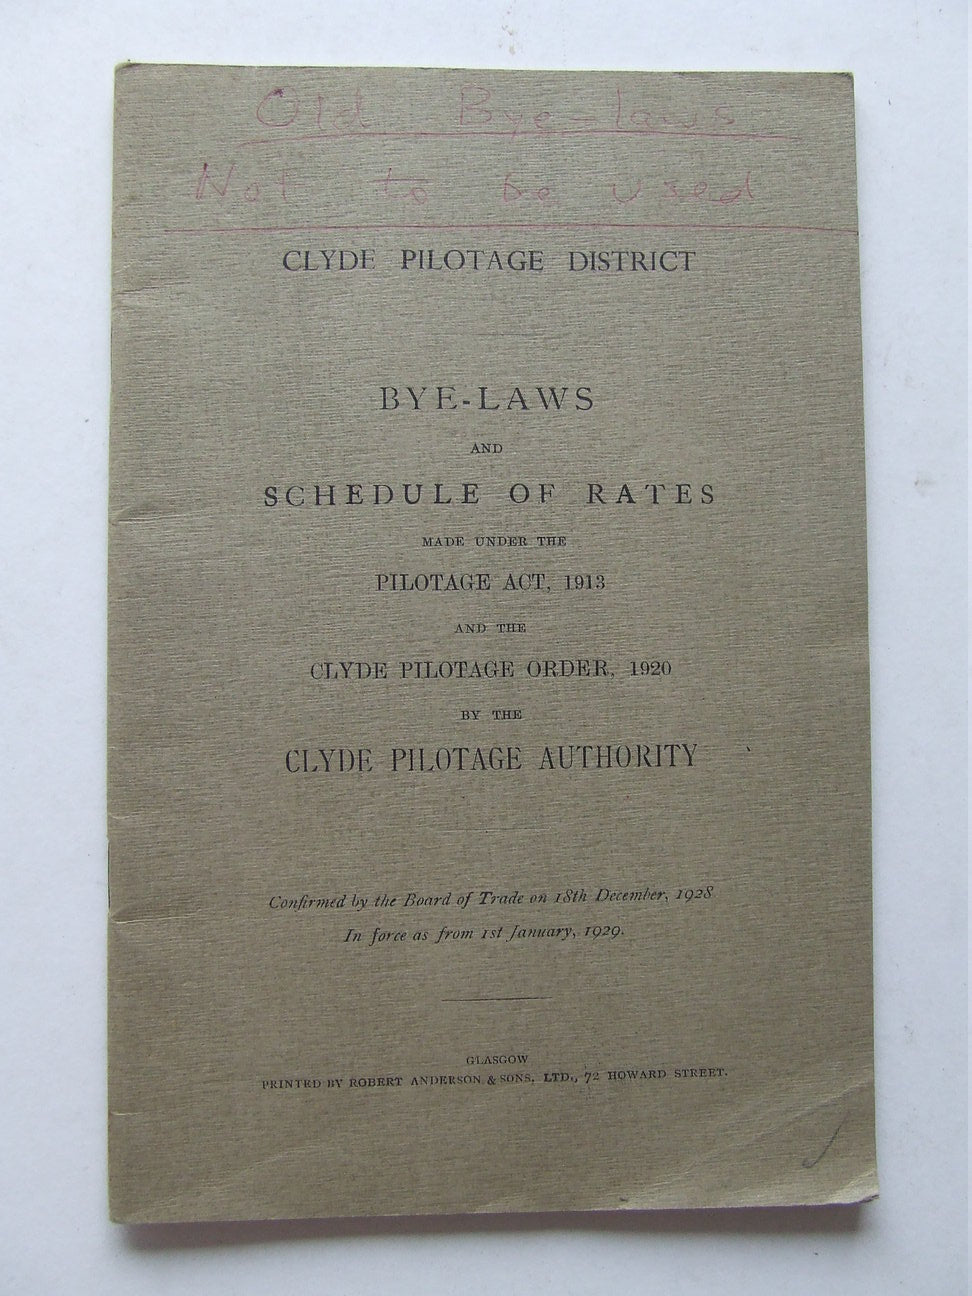 Bye-laws and Schedule of Rates made under the Pilotage Act, 1913